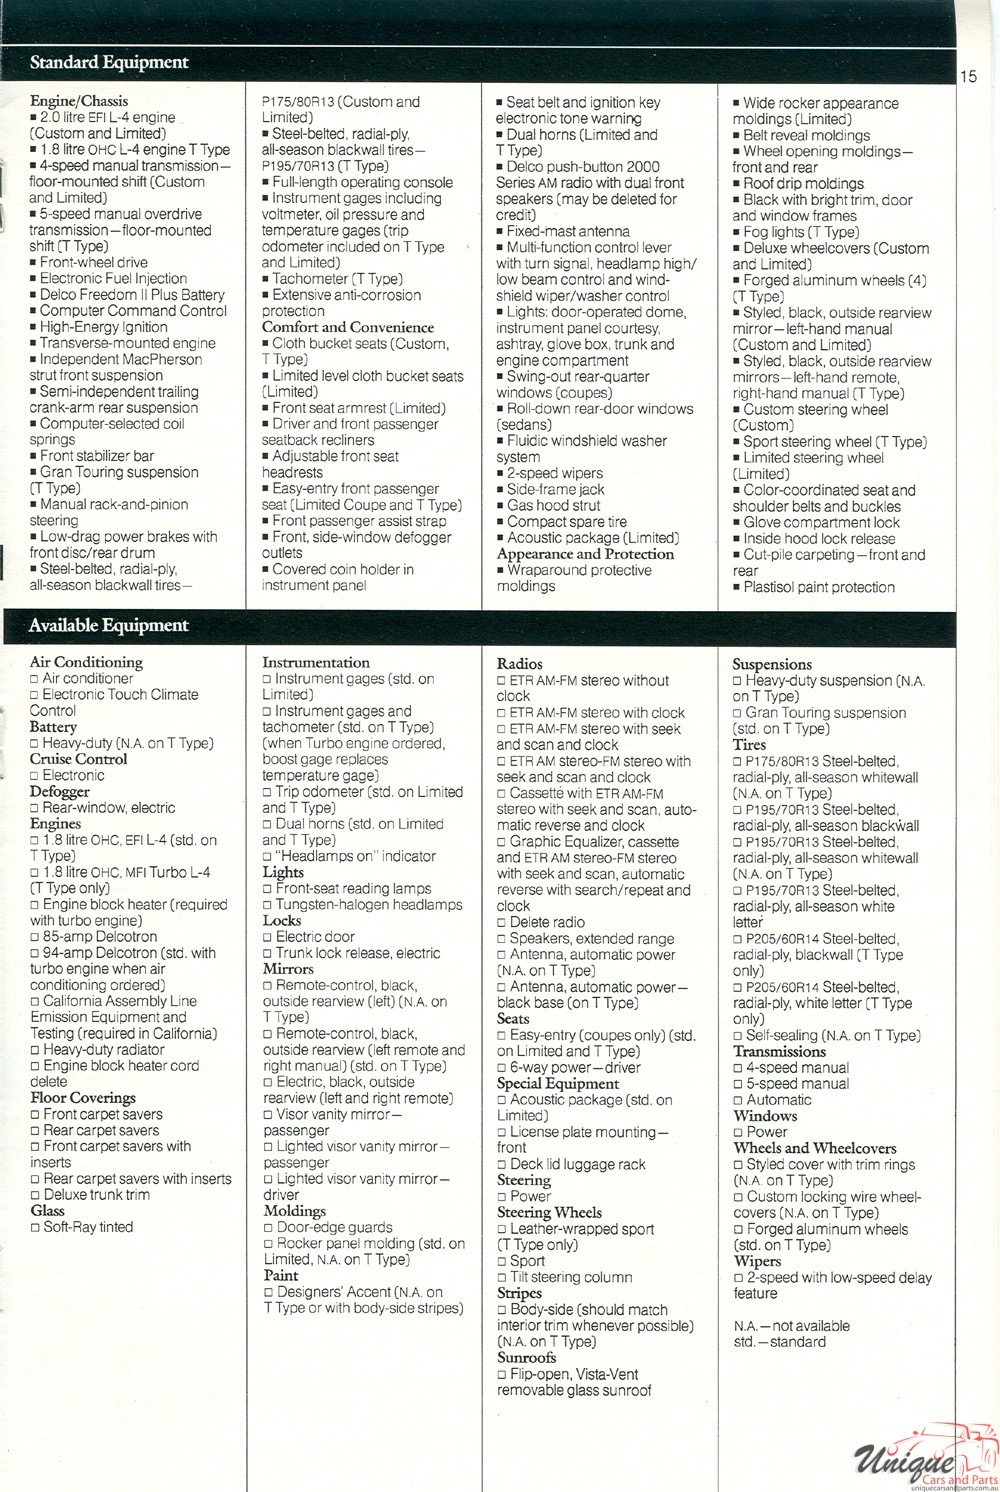 1985 Buick Buying Guide Page 16